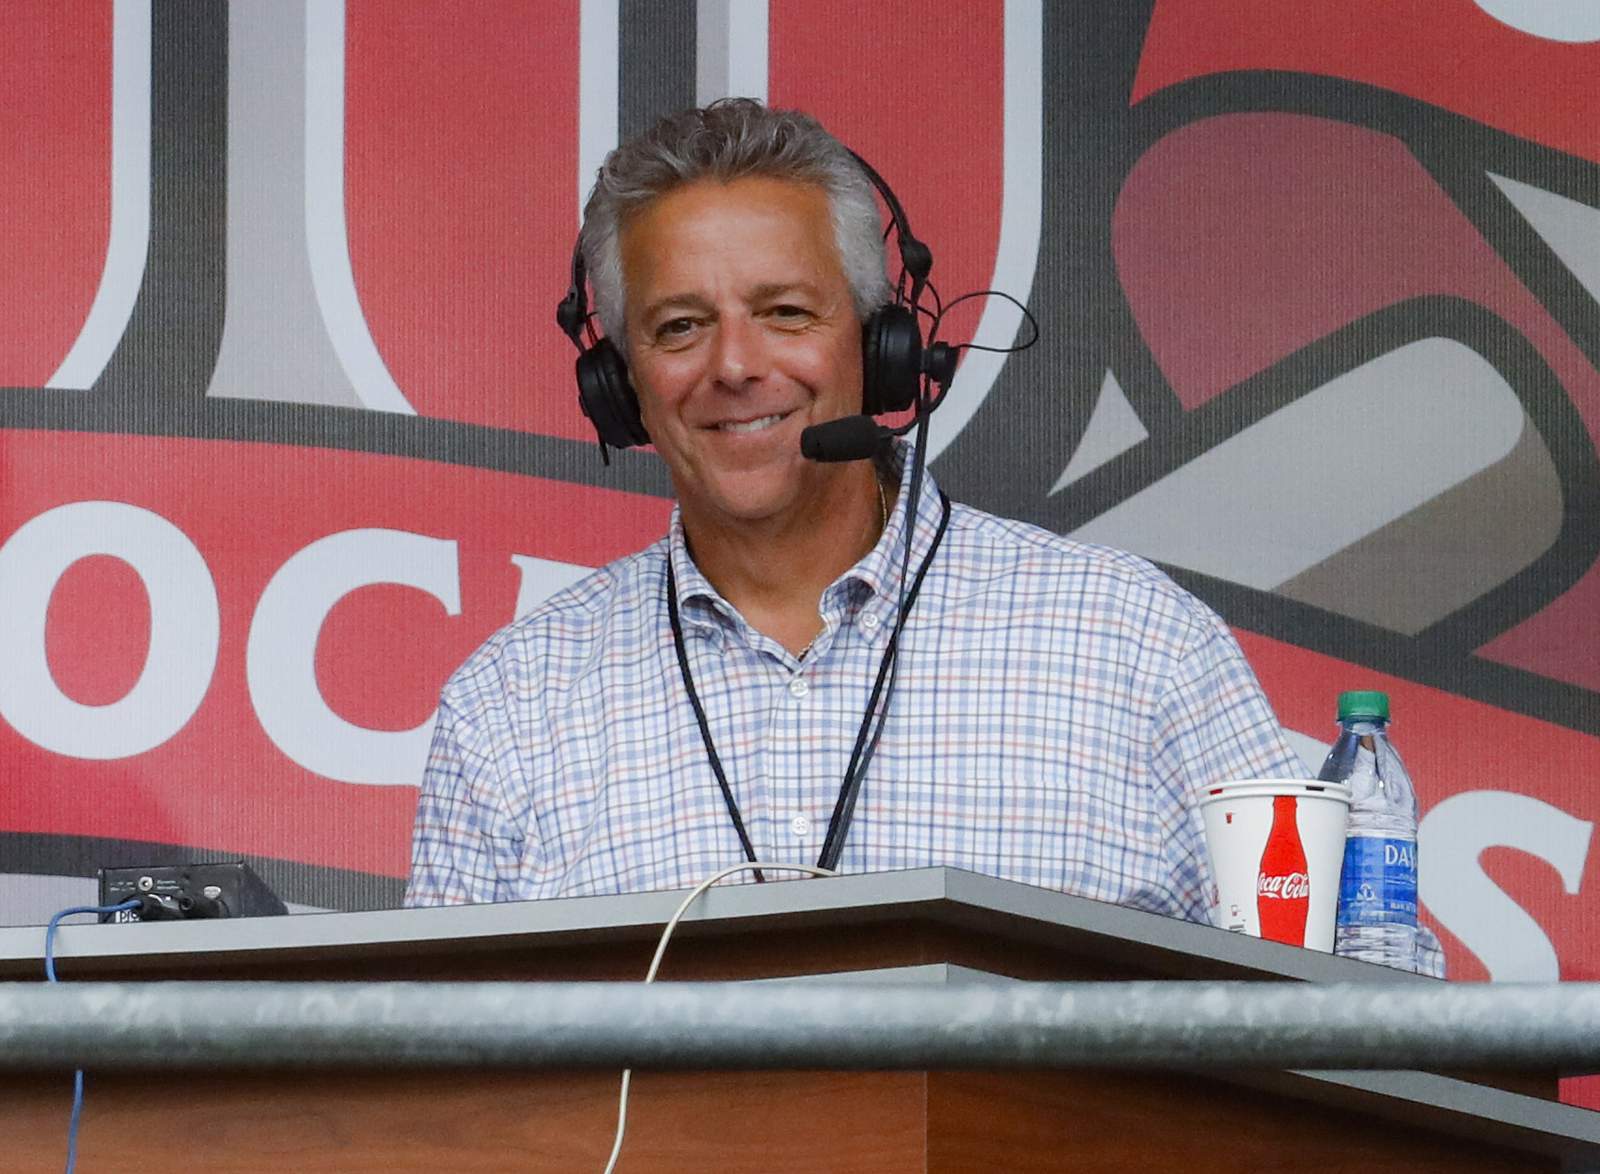 Reds say broadcaster Brennaman resigns after anti-gay slur